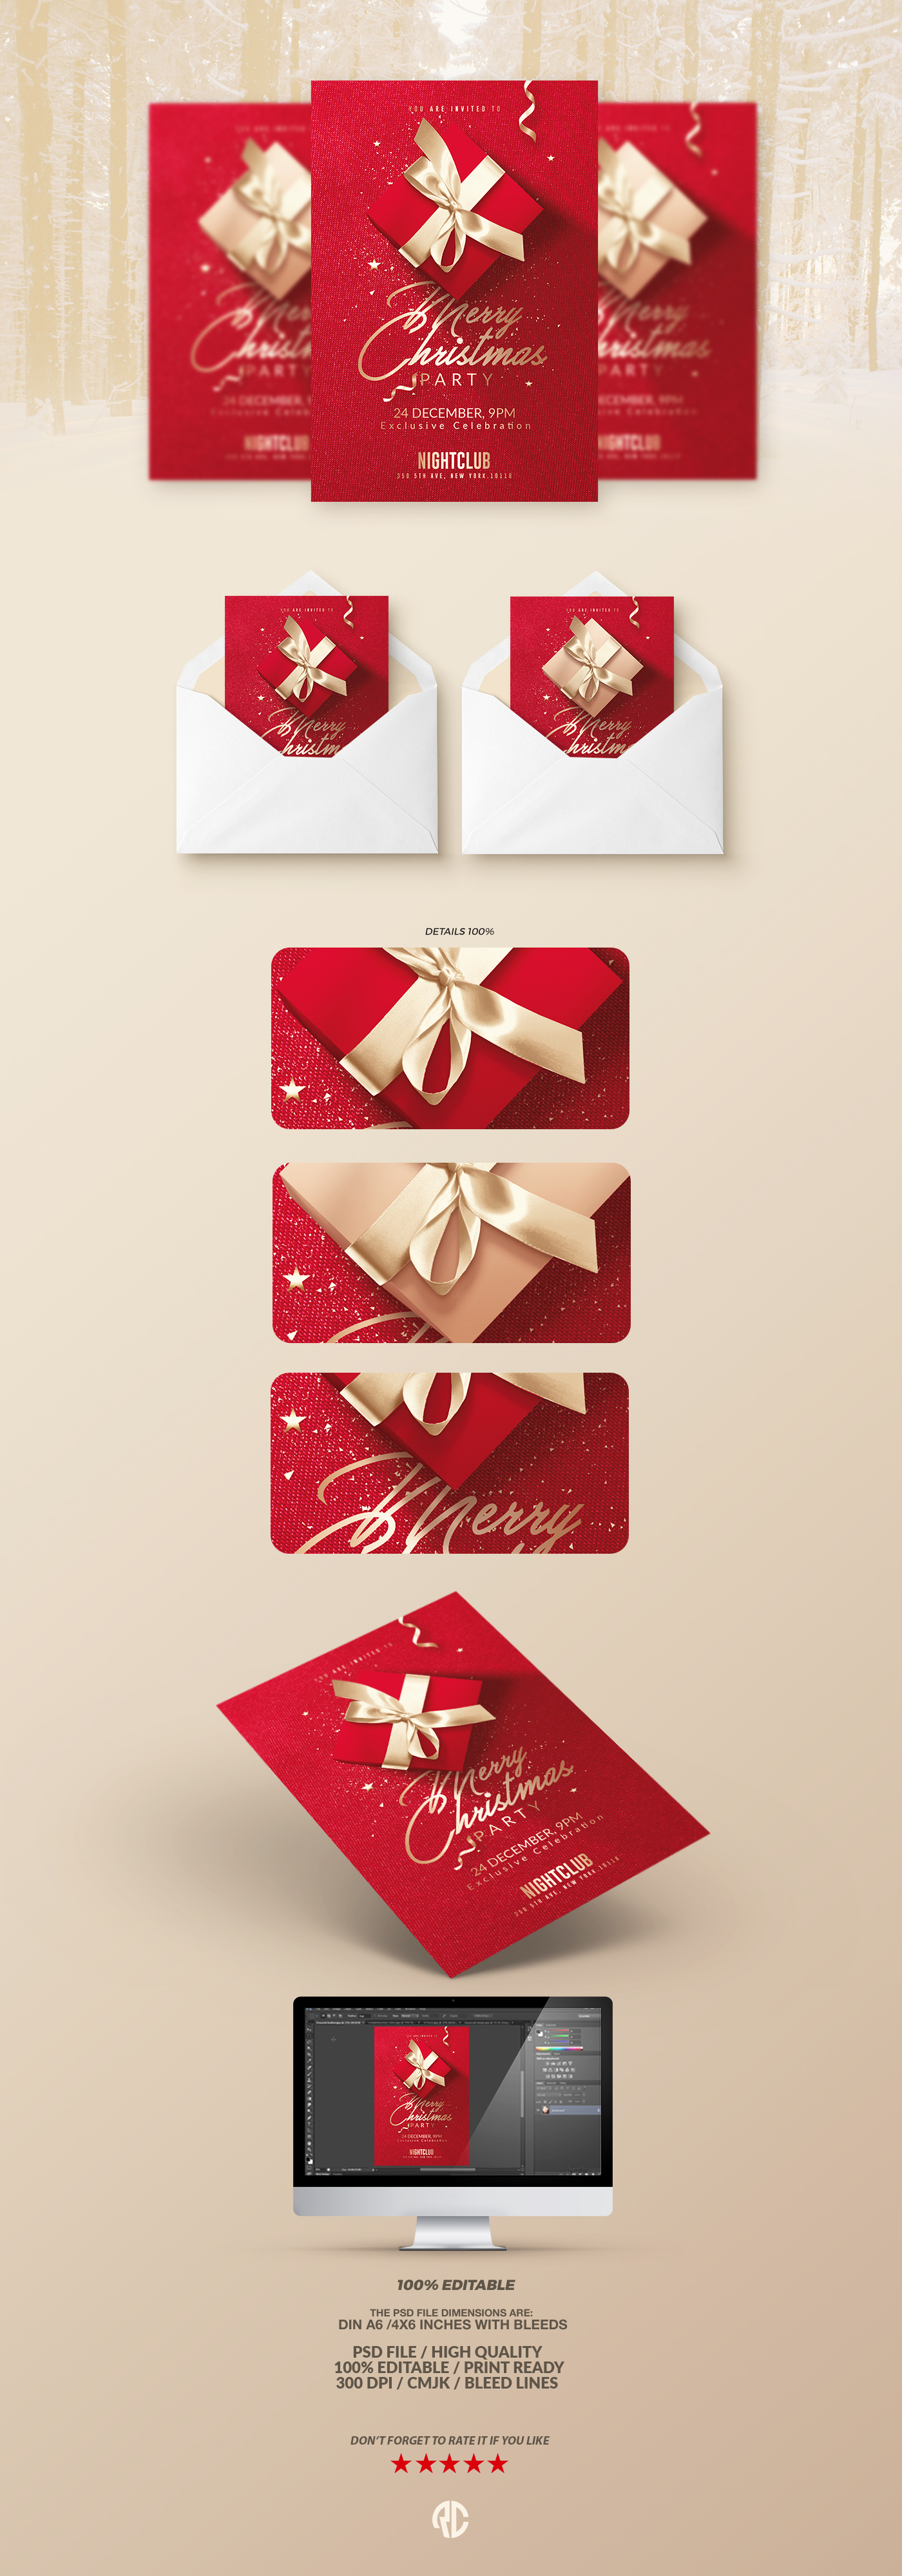 Christmas celebration Invitation classy red gift new year christmas template Flyer Party christmas cards